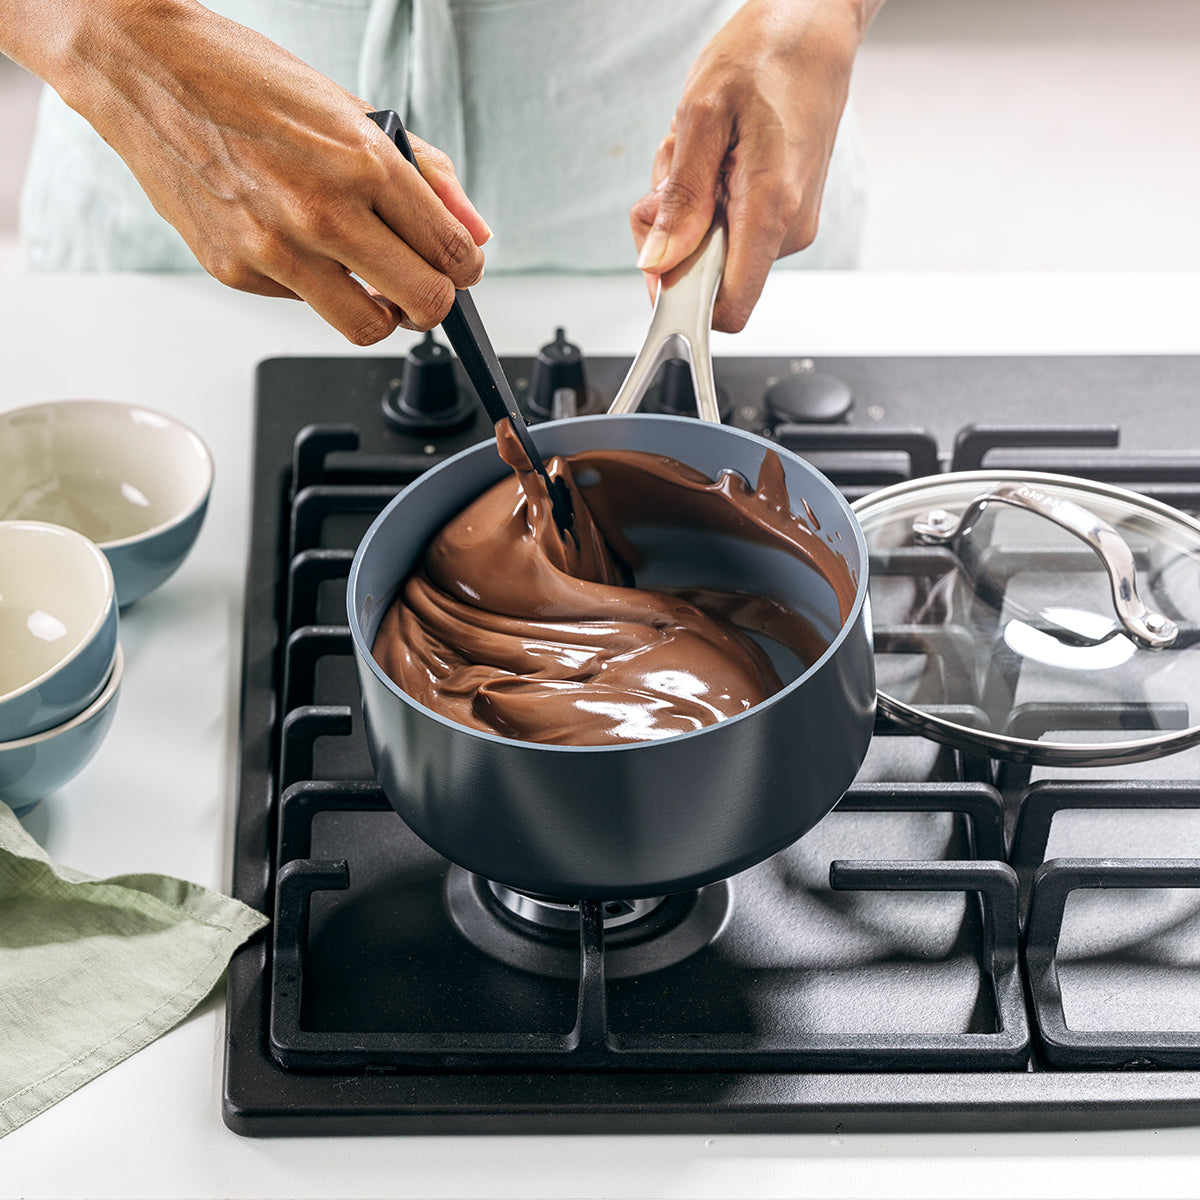 sauce pan on stove top with hands stirring chocolate sauce in it.